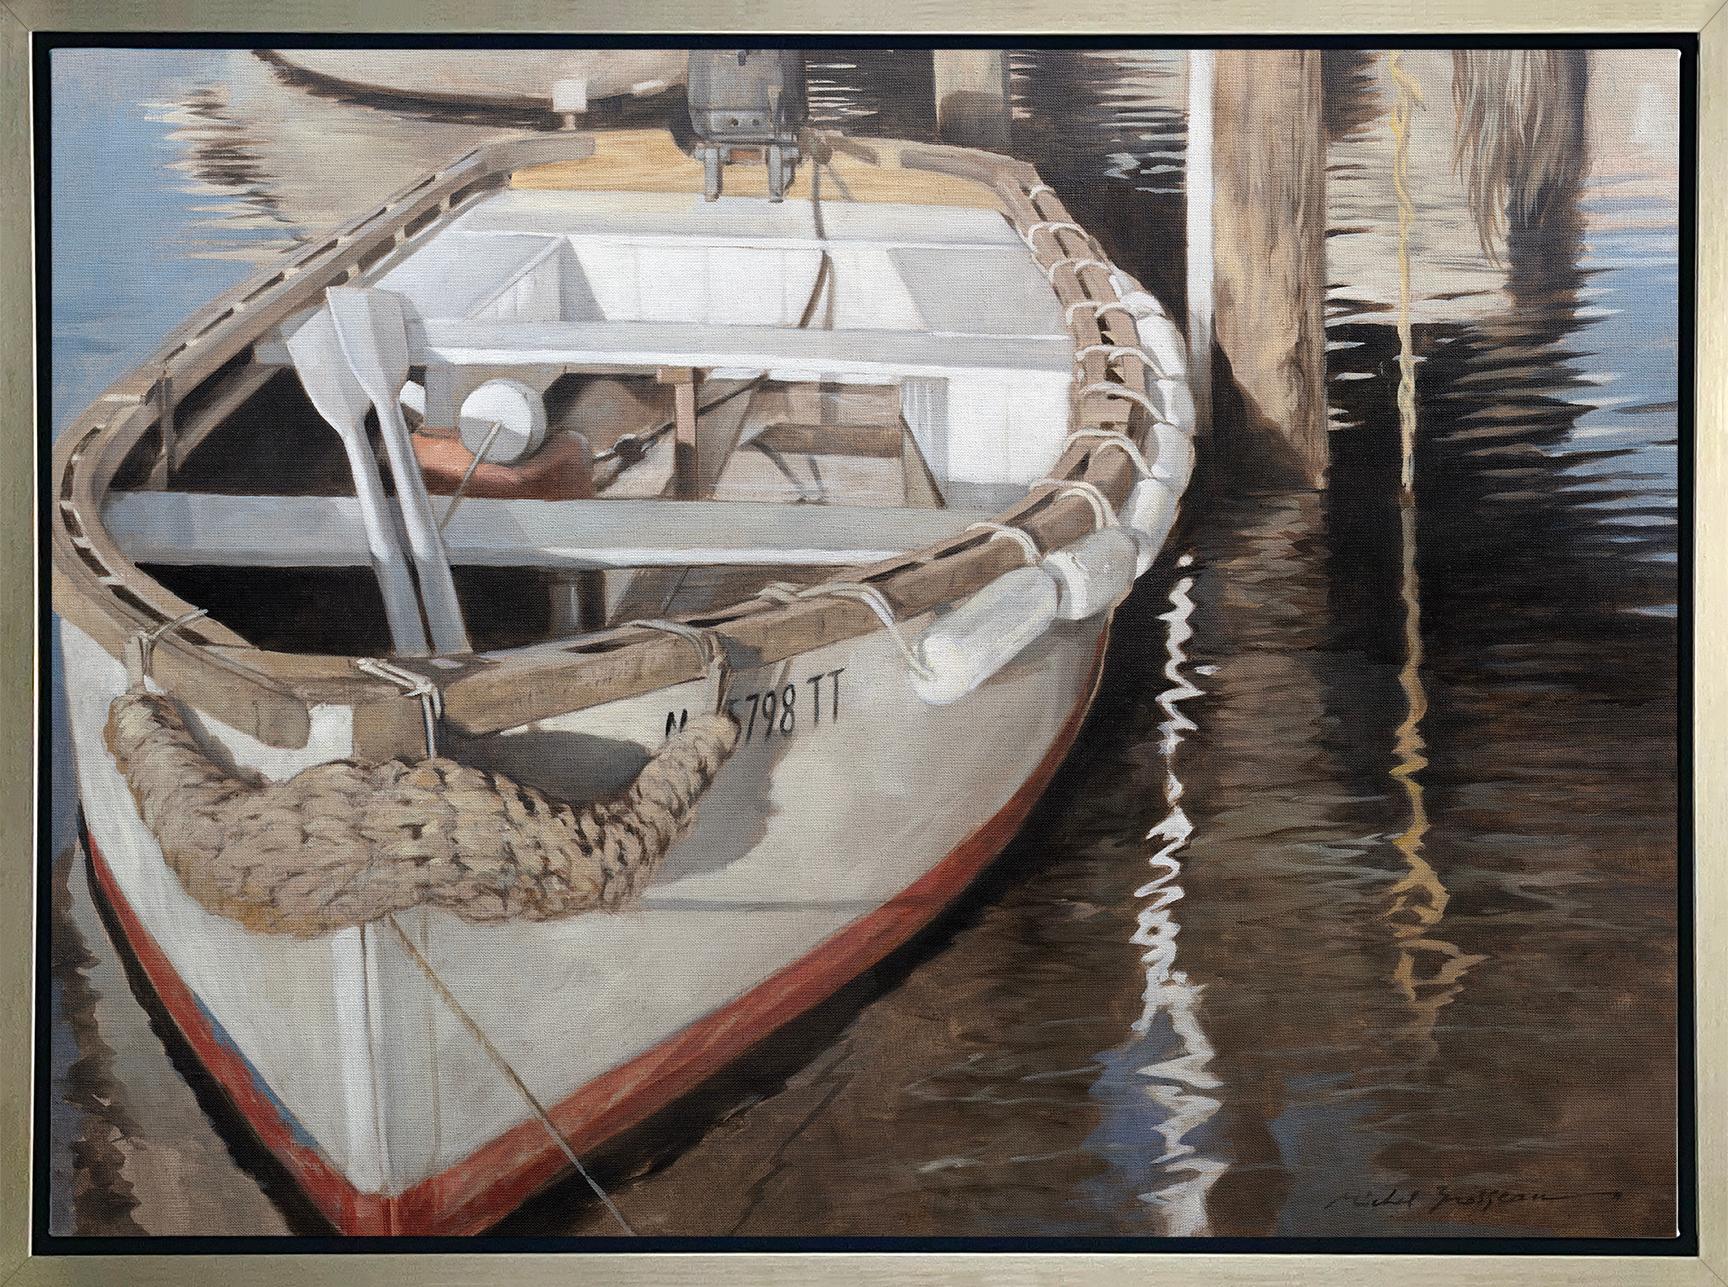 "Vineyard Haven Dinghy," Framed Limited Edition Giclee Print, 36" x 48"